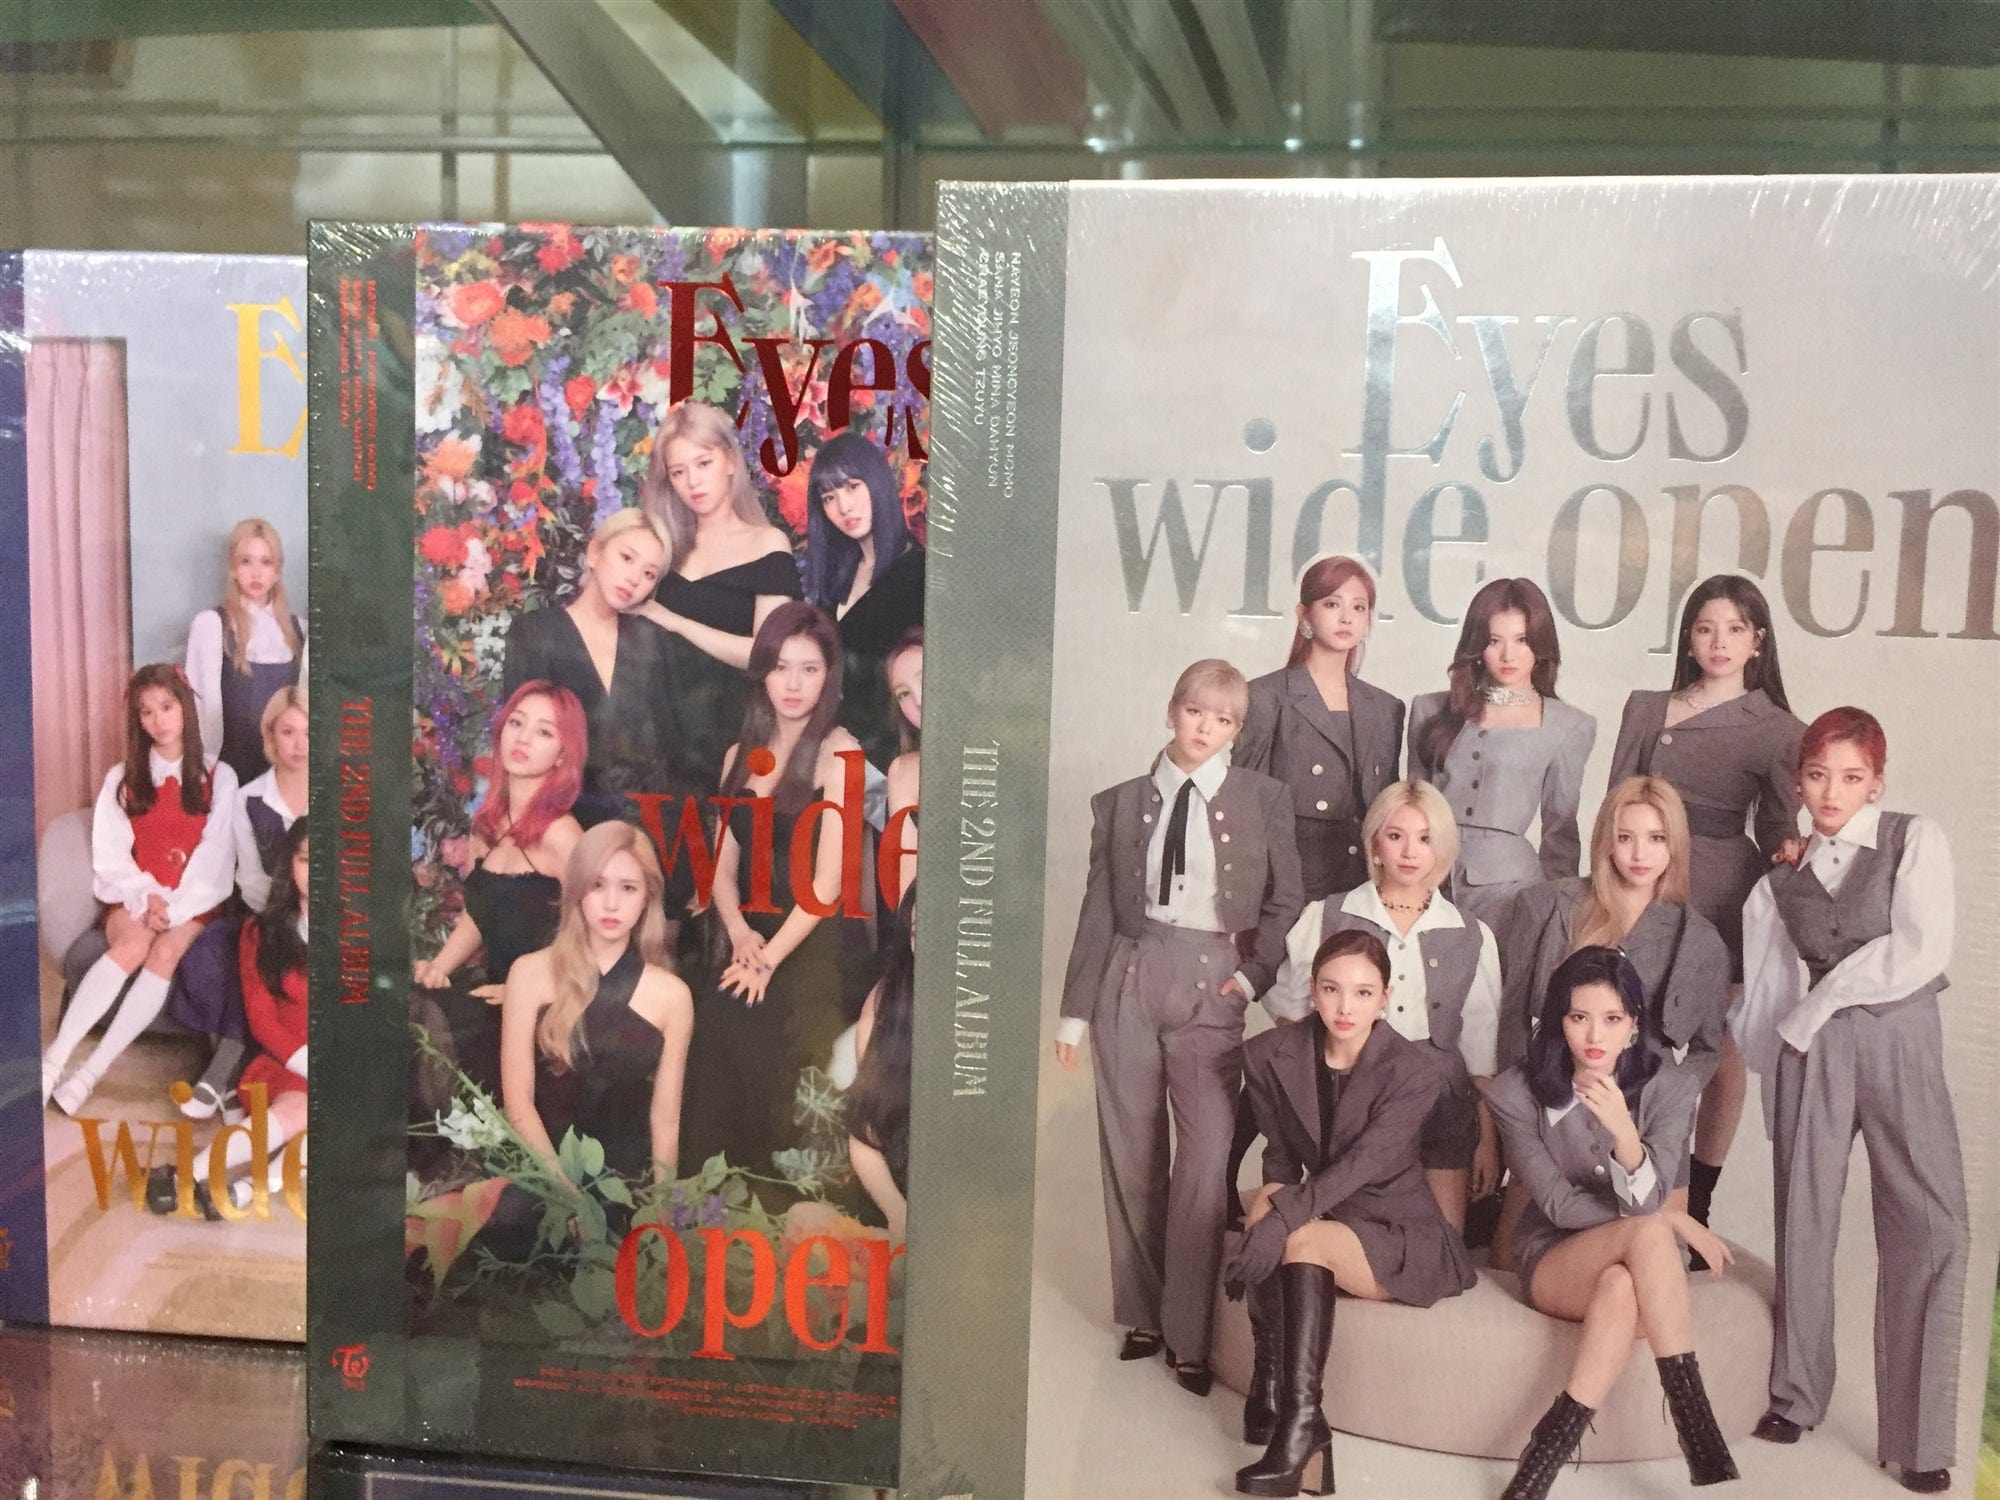 TWICE 2nd Album - EYES WIDE OPEN [ STORY ver. ] CD + Photobook + Message  Card + Lyric Poster + Sticker + Photocards